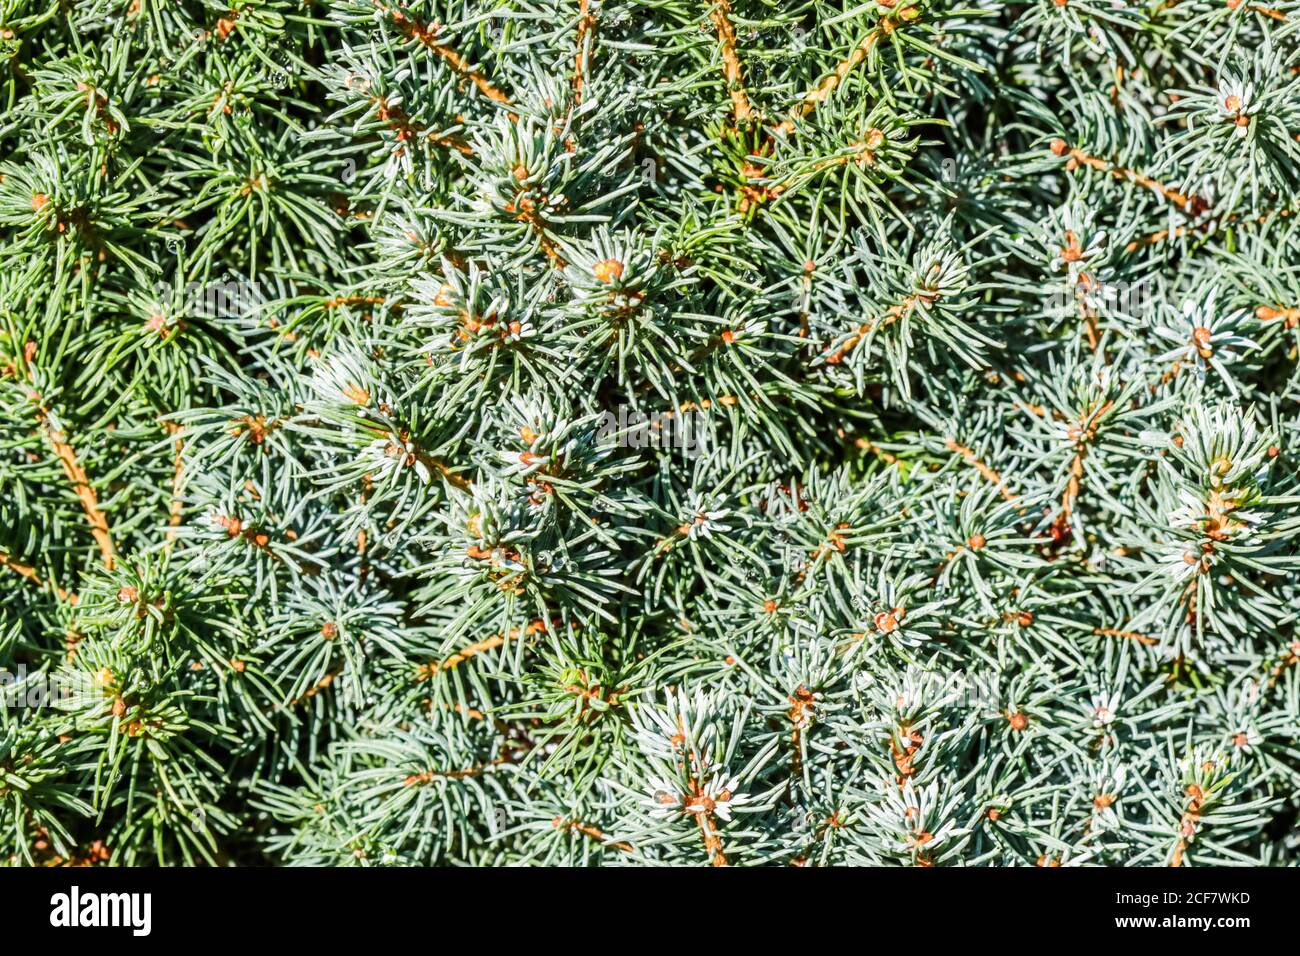 Closeup green leaves of decorative evergreen coniferous tree Canadian spruce Picea glauca with drops of water after the rain. Natural background Stock Photo